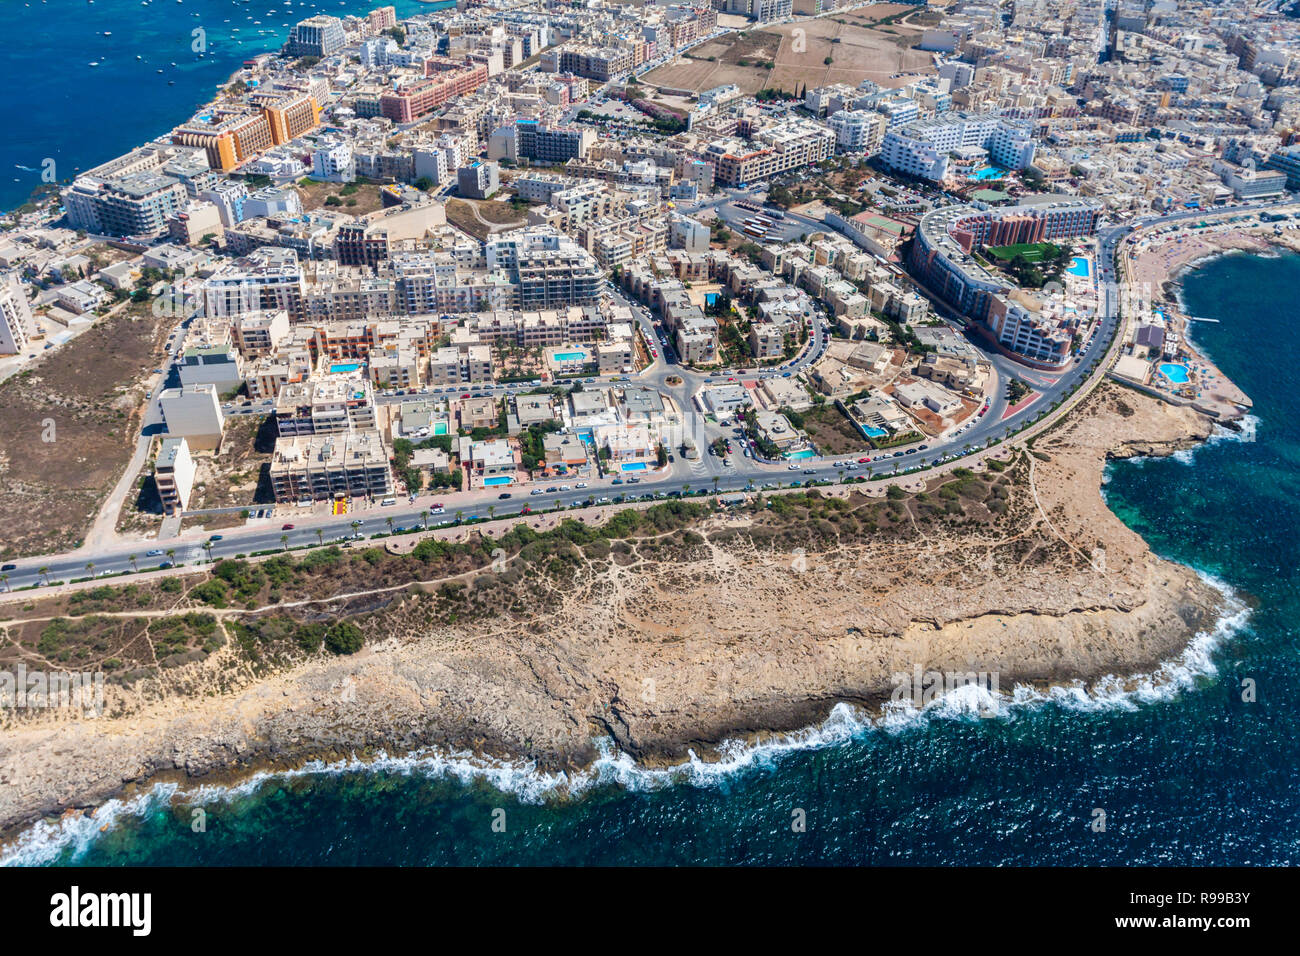 Seaside cliffs, colourful houses and streets of Qawra town in St. Paul's Bay area in the Northern Region, Malta. Popular tourist resort between Bugibba and Salina. Aerial view. Malta island from above Stock Photo